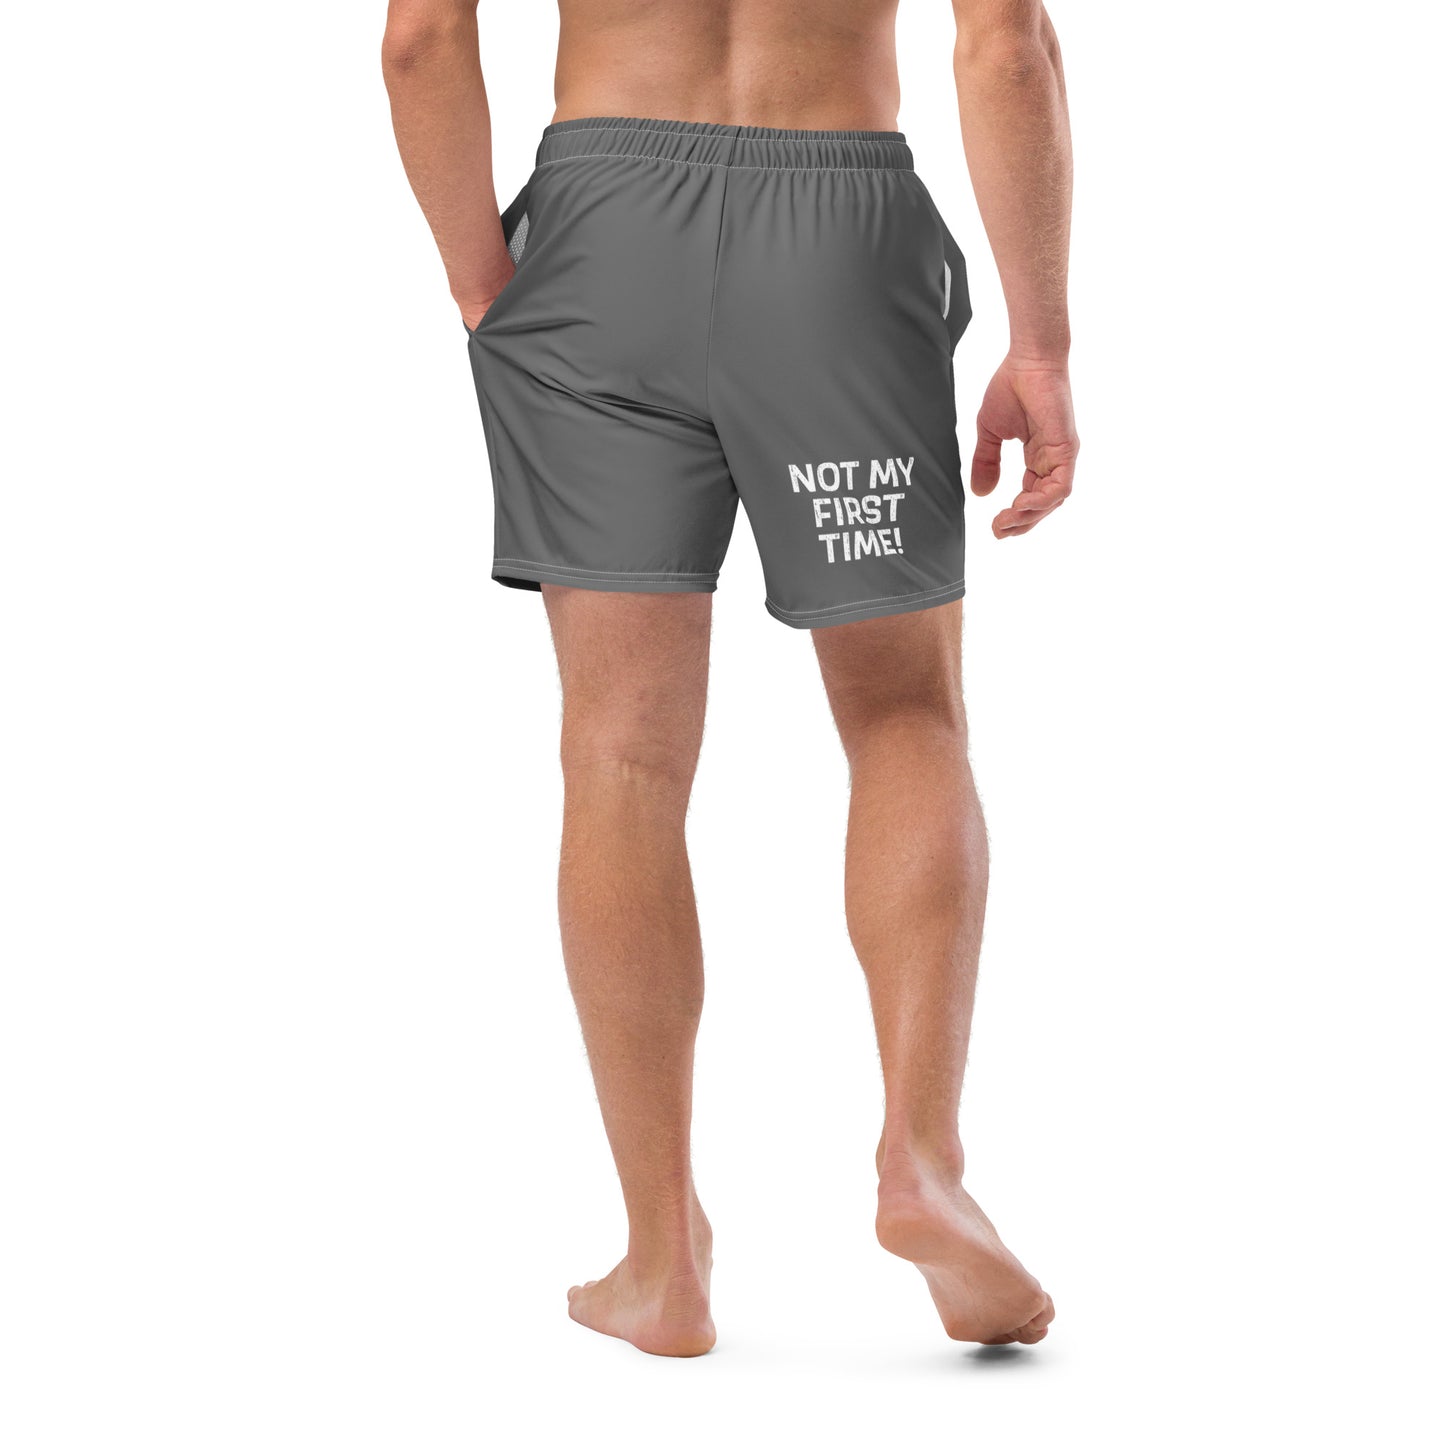 Not my first time! 954 Signature Men's swim trunks